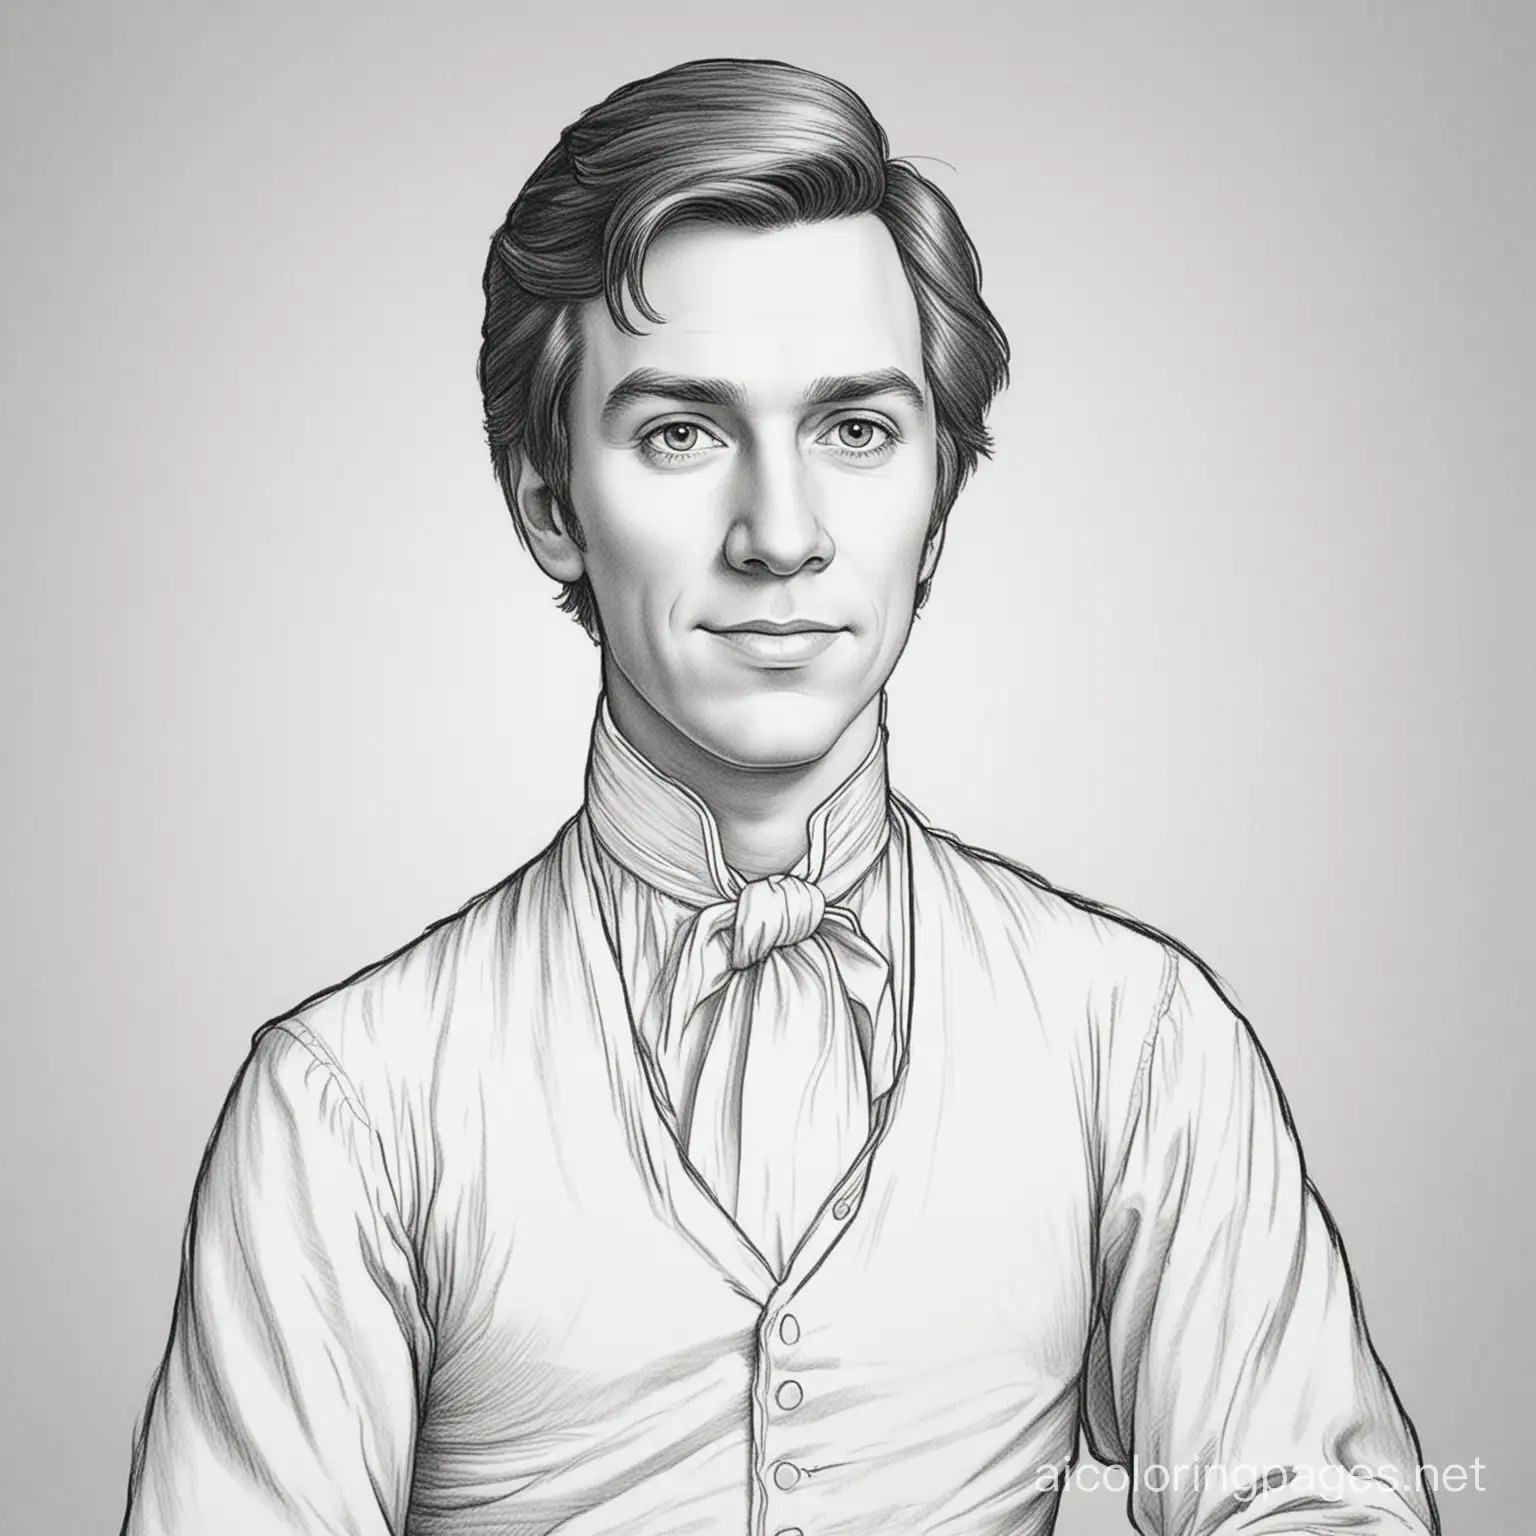 Joseph-Smith-Jr-Coloring-Page-Simple-Black-and-White-Line-Art